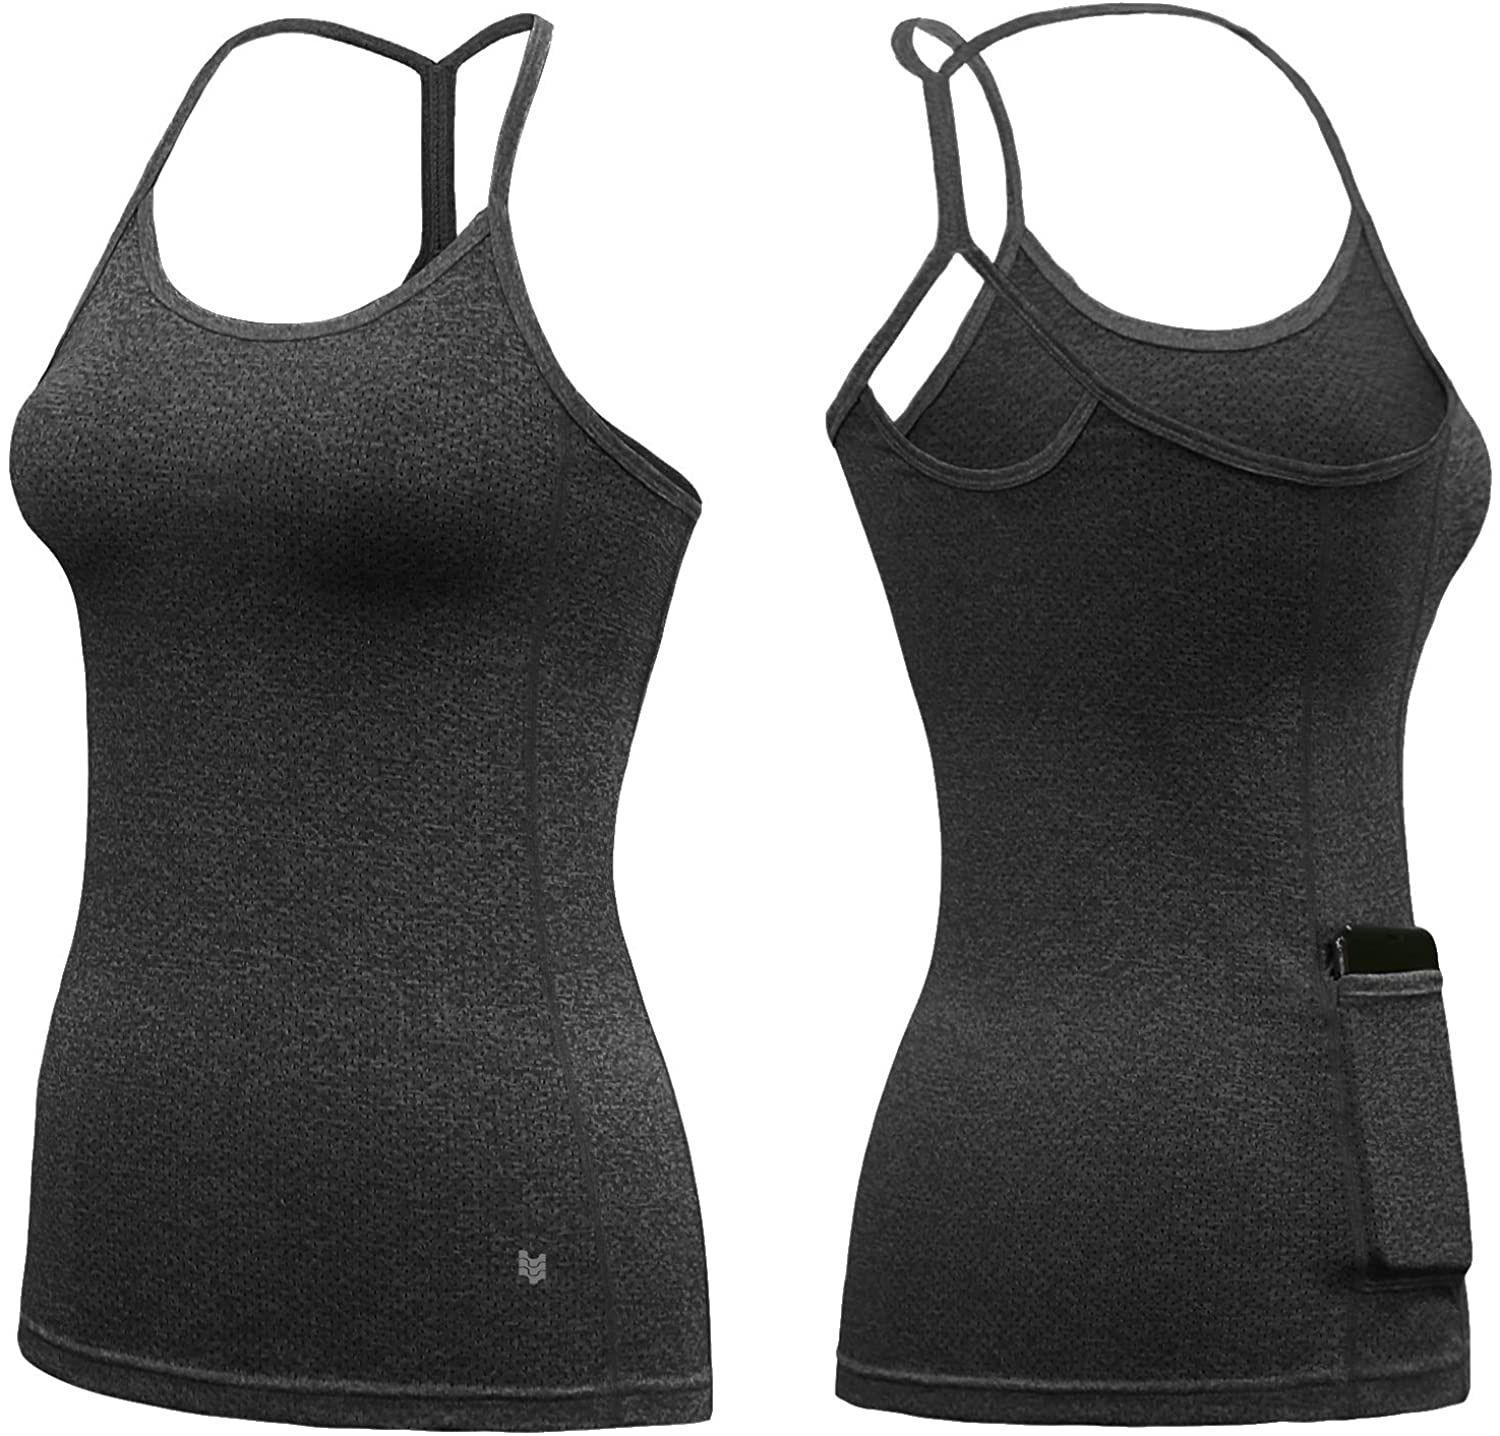 Strappy Athletic Tanks with Side Pocket Exercise Gym Yoga Shirts ODODOS Workout Tank Tops for Women